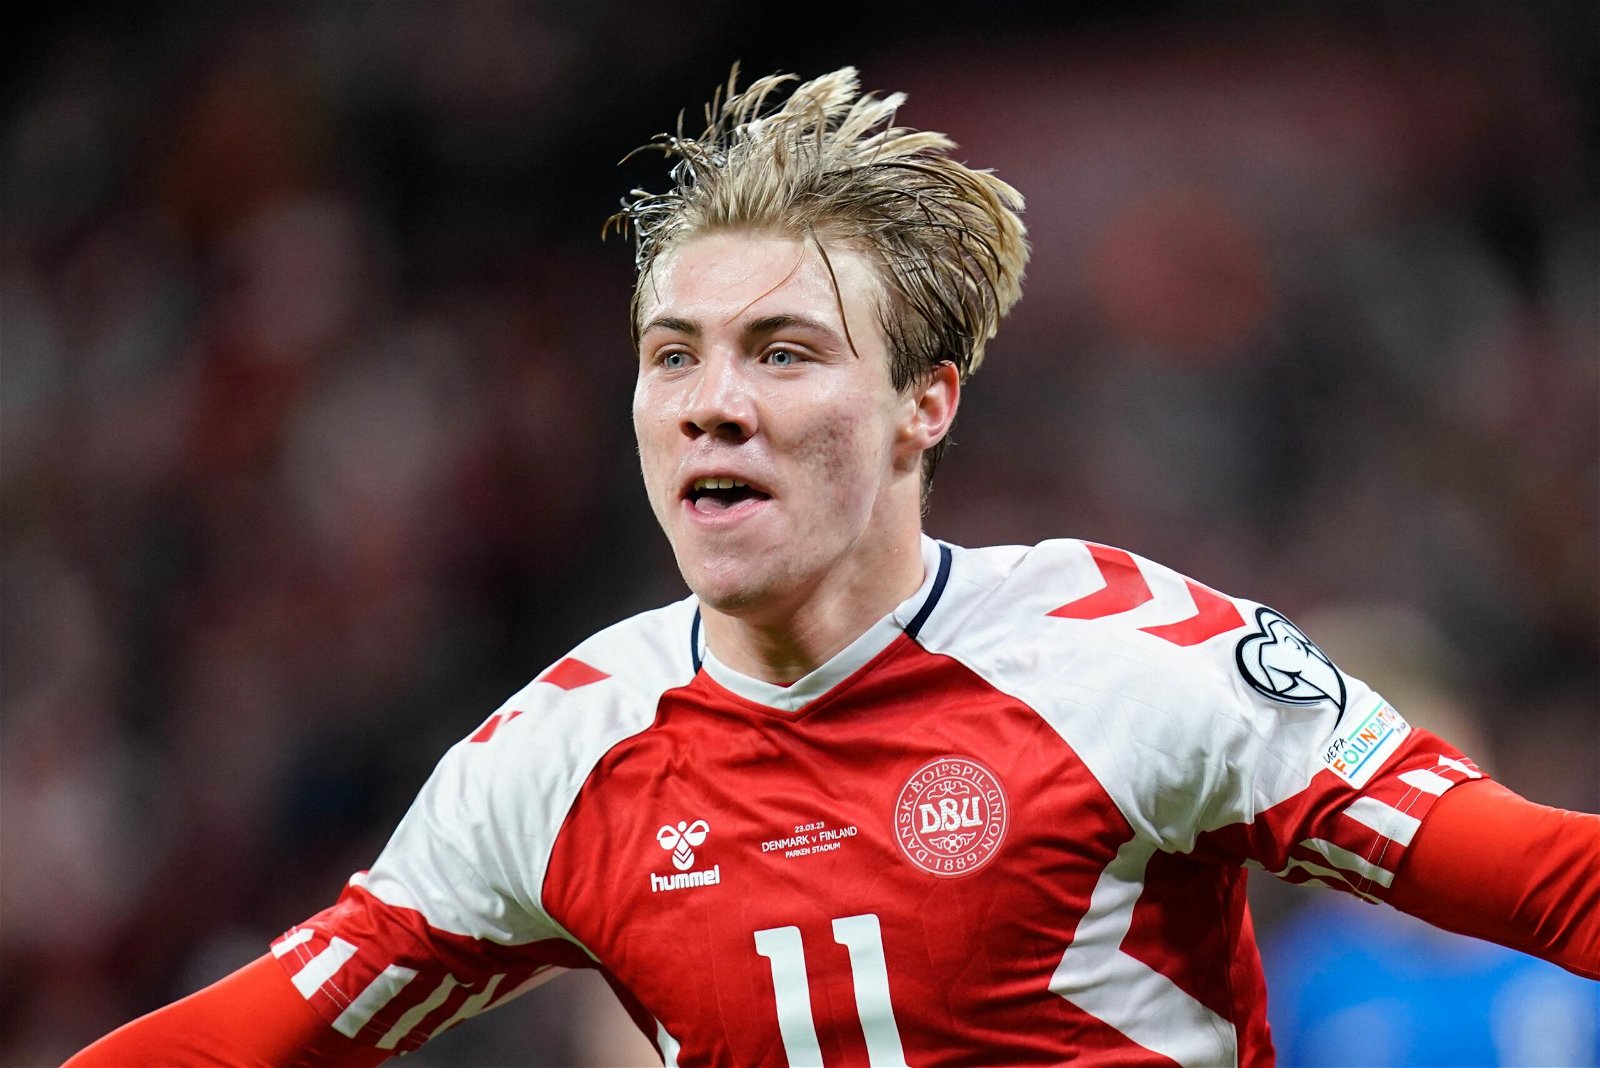 Rasmus Højlund transfer to Manchester United is likely to happen this summer